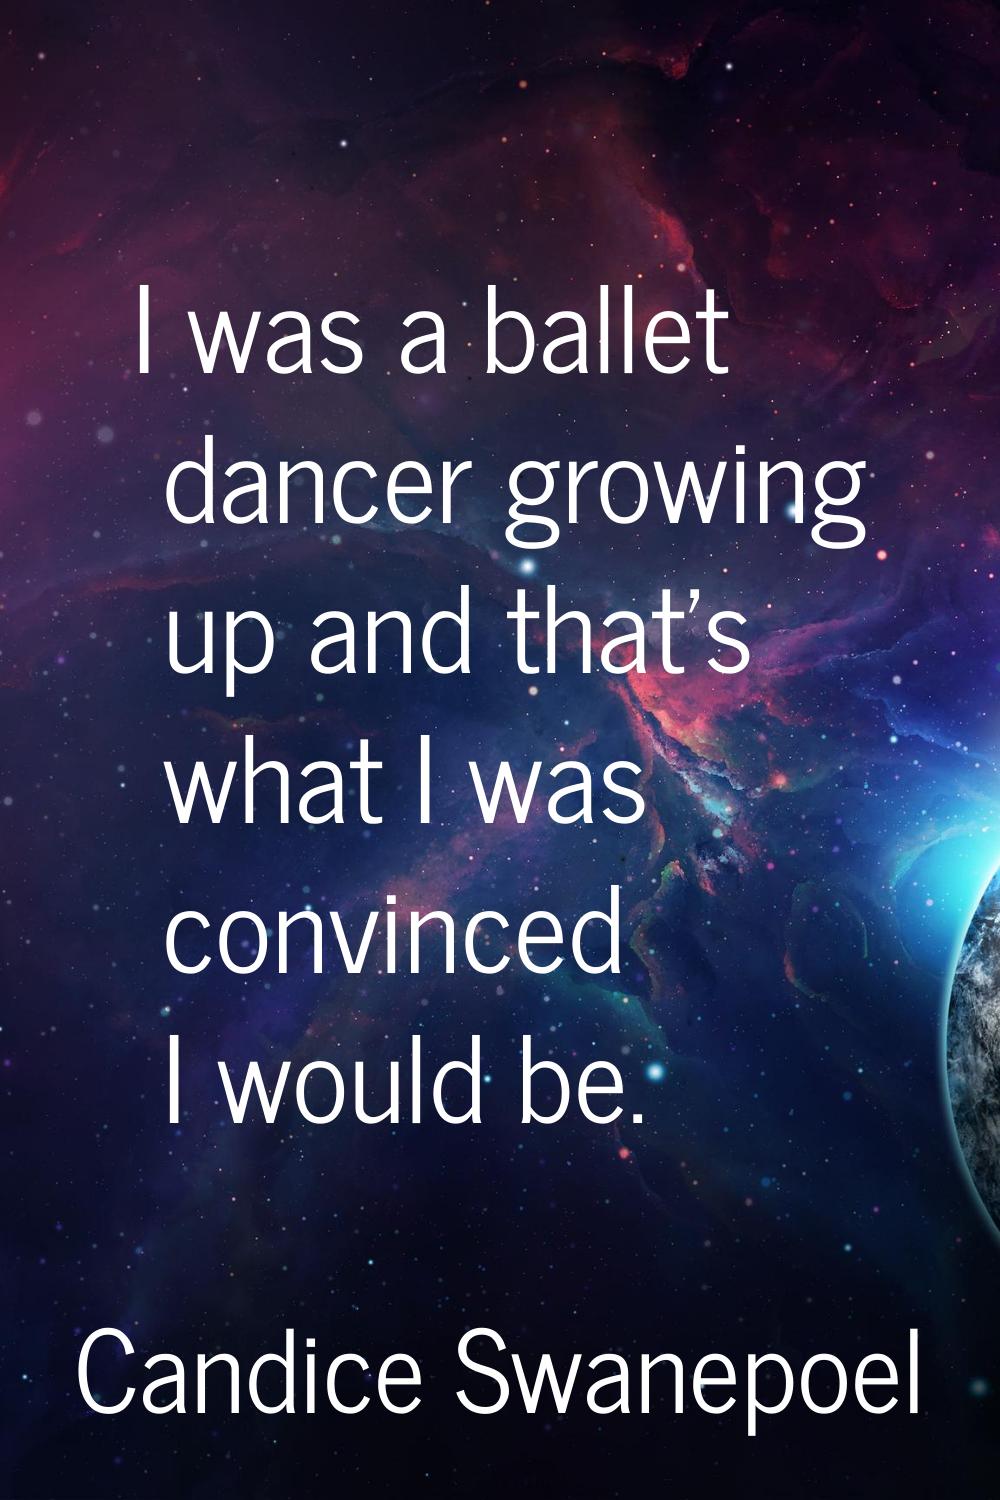 I was a ballet dancer growing up and that's what I was convinced I would be.